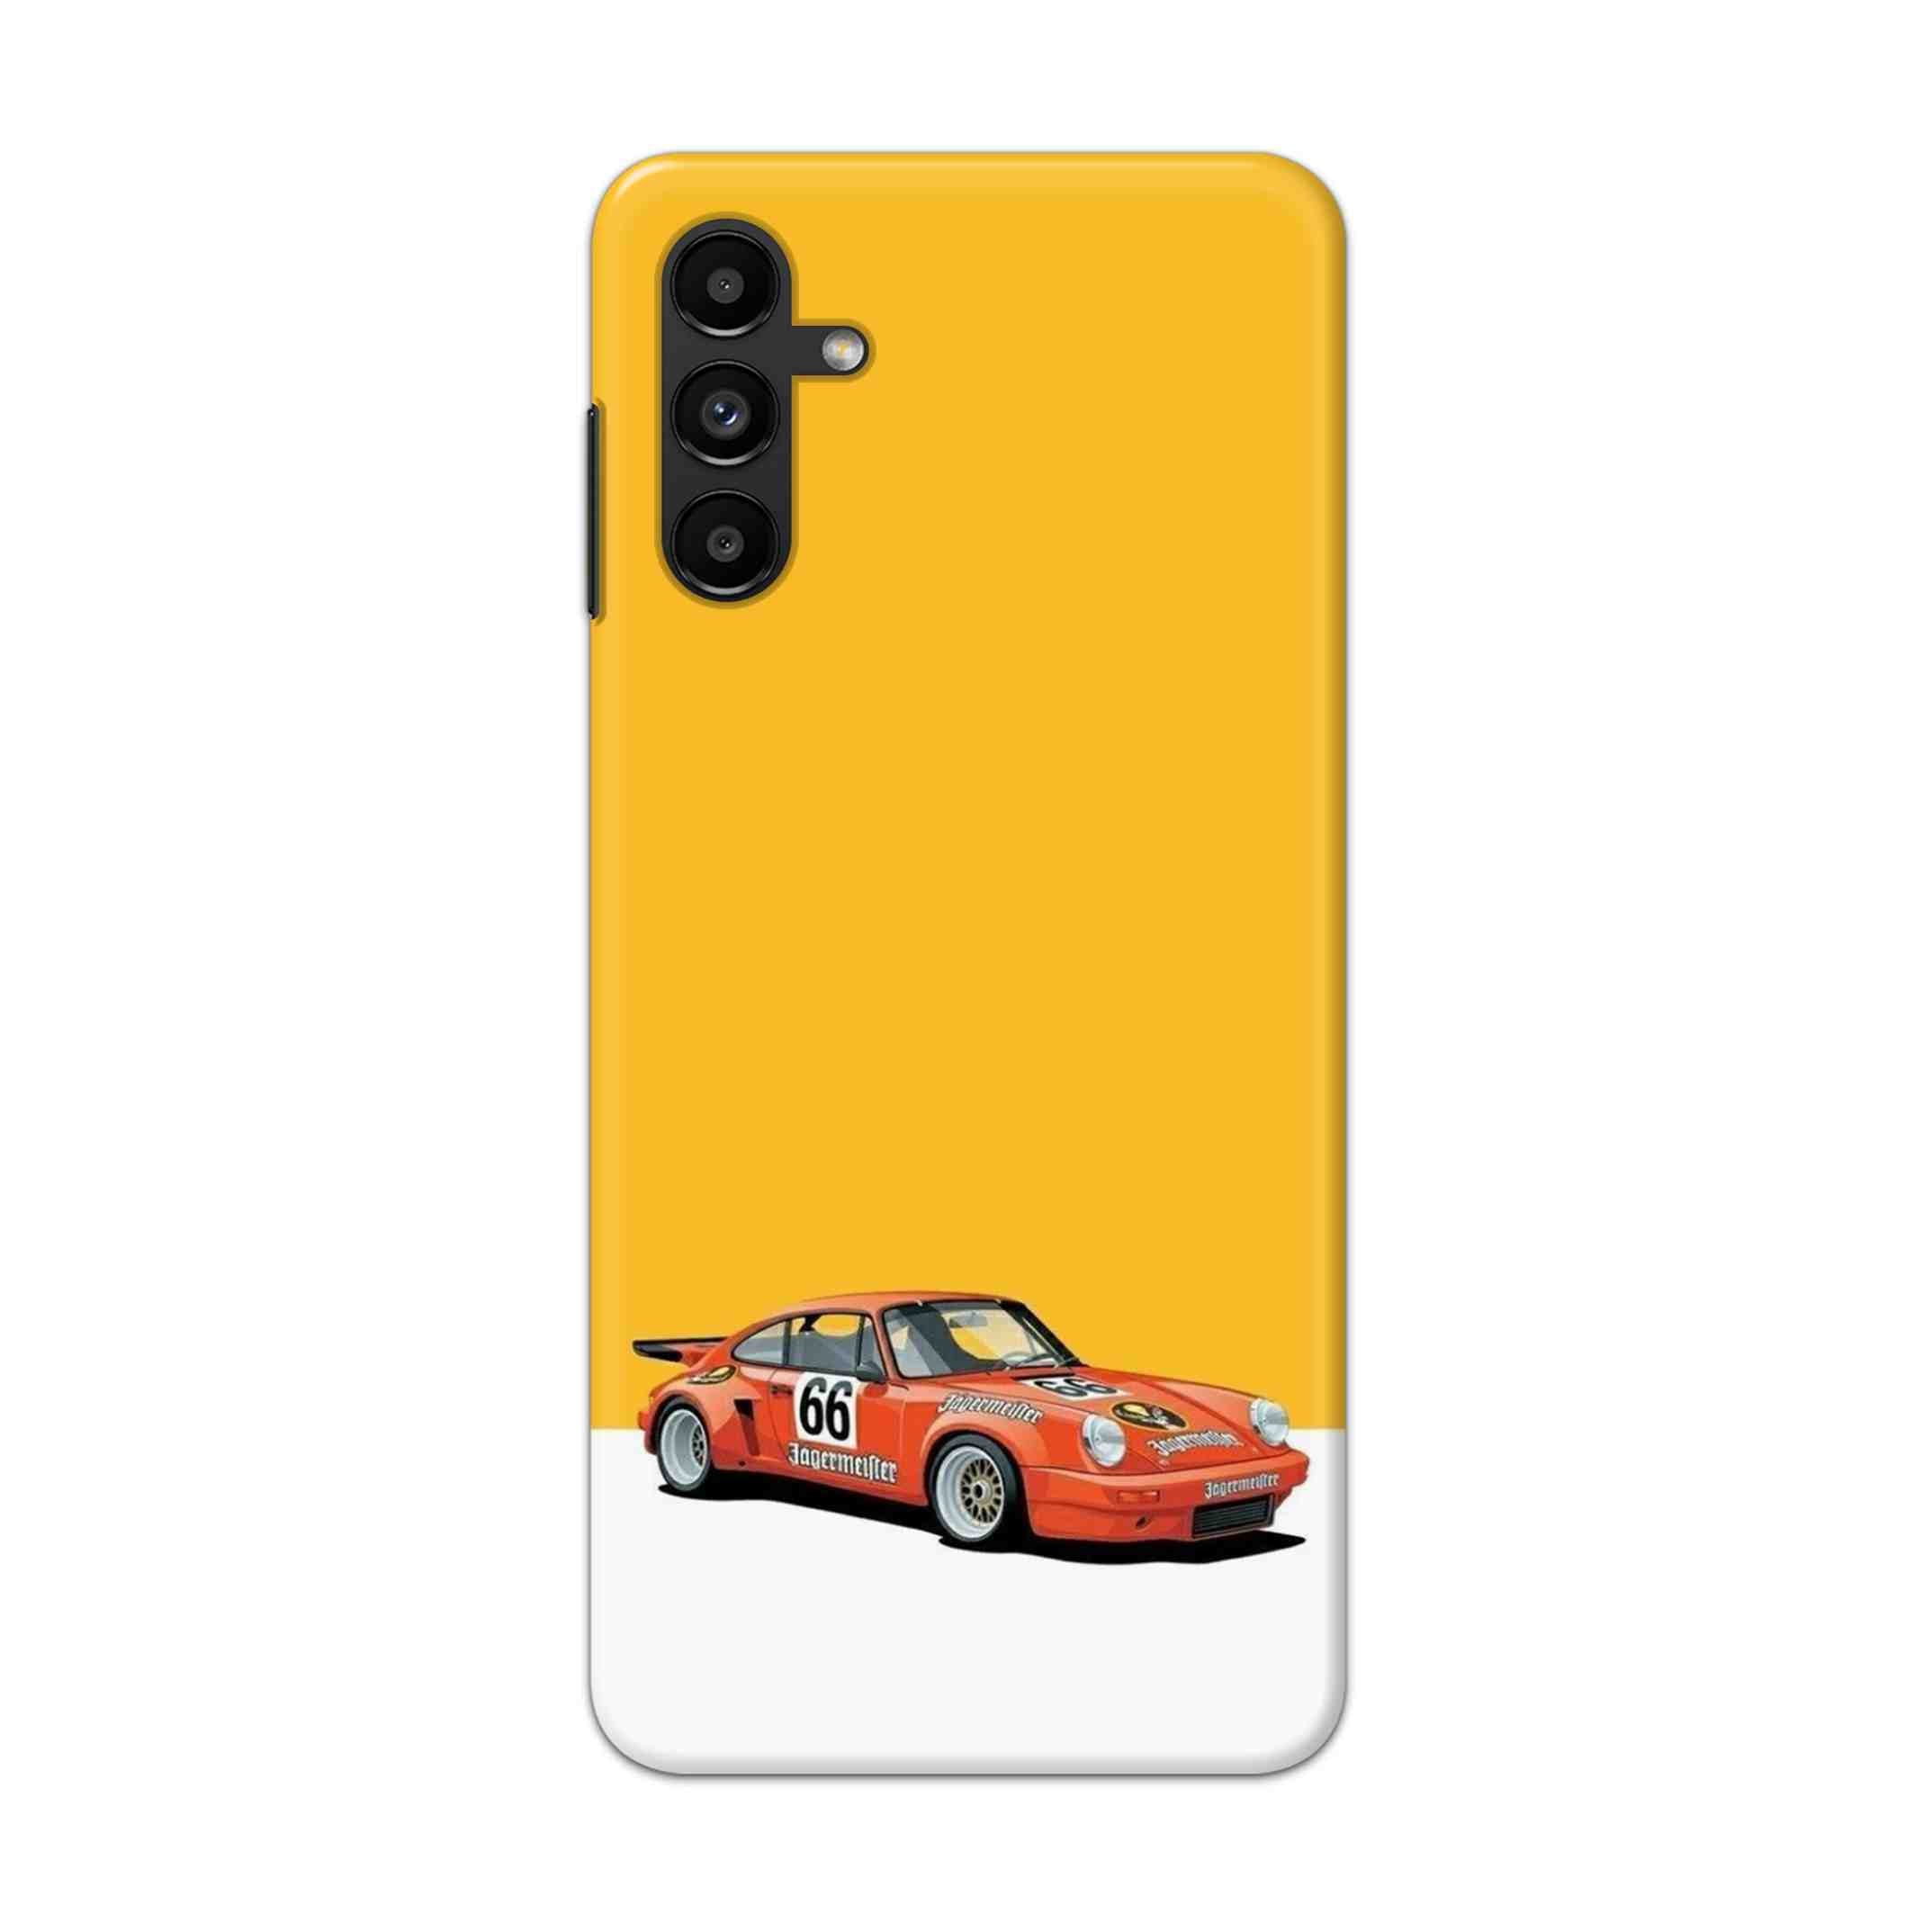 Buy Porche Hard Back Mobile Phone Case/Cover For Galaxy A13 (5G) Online